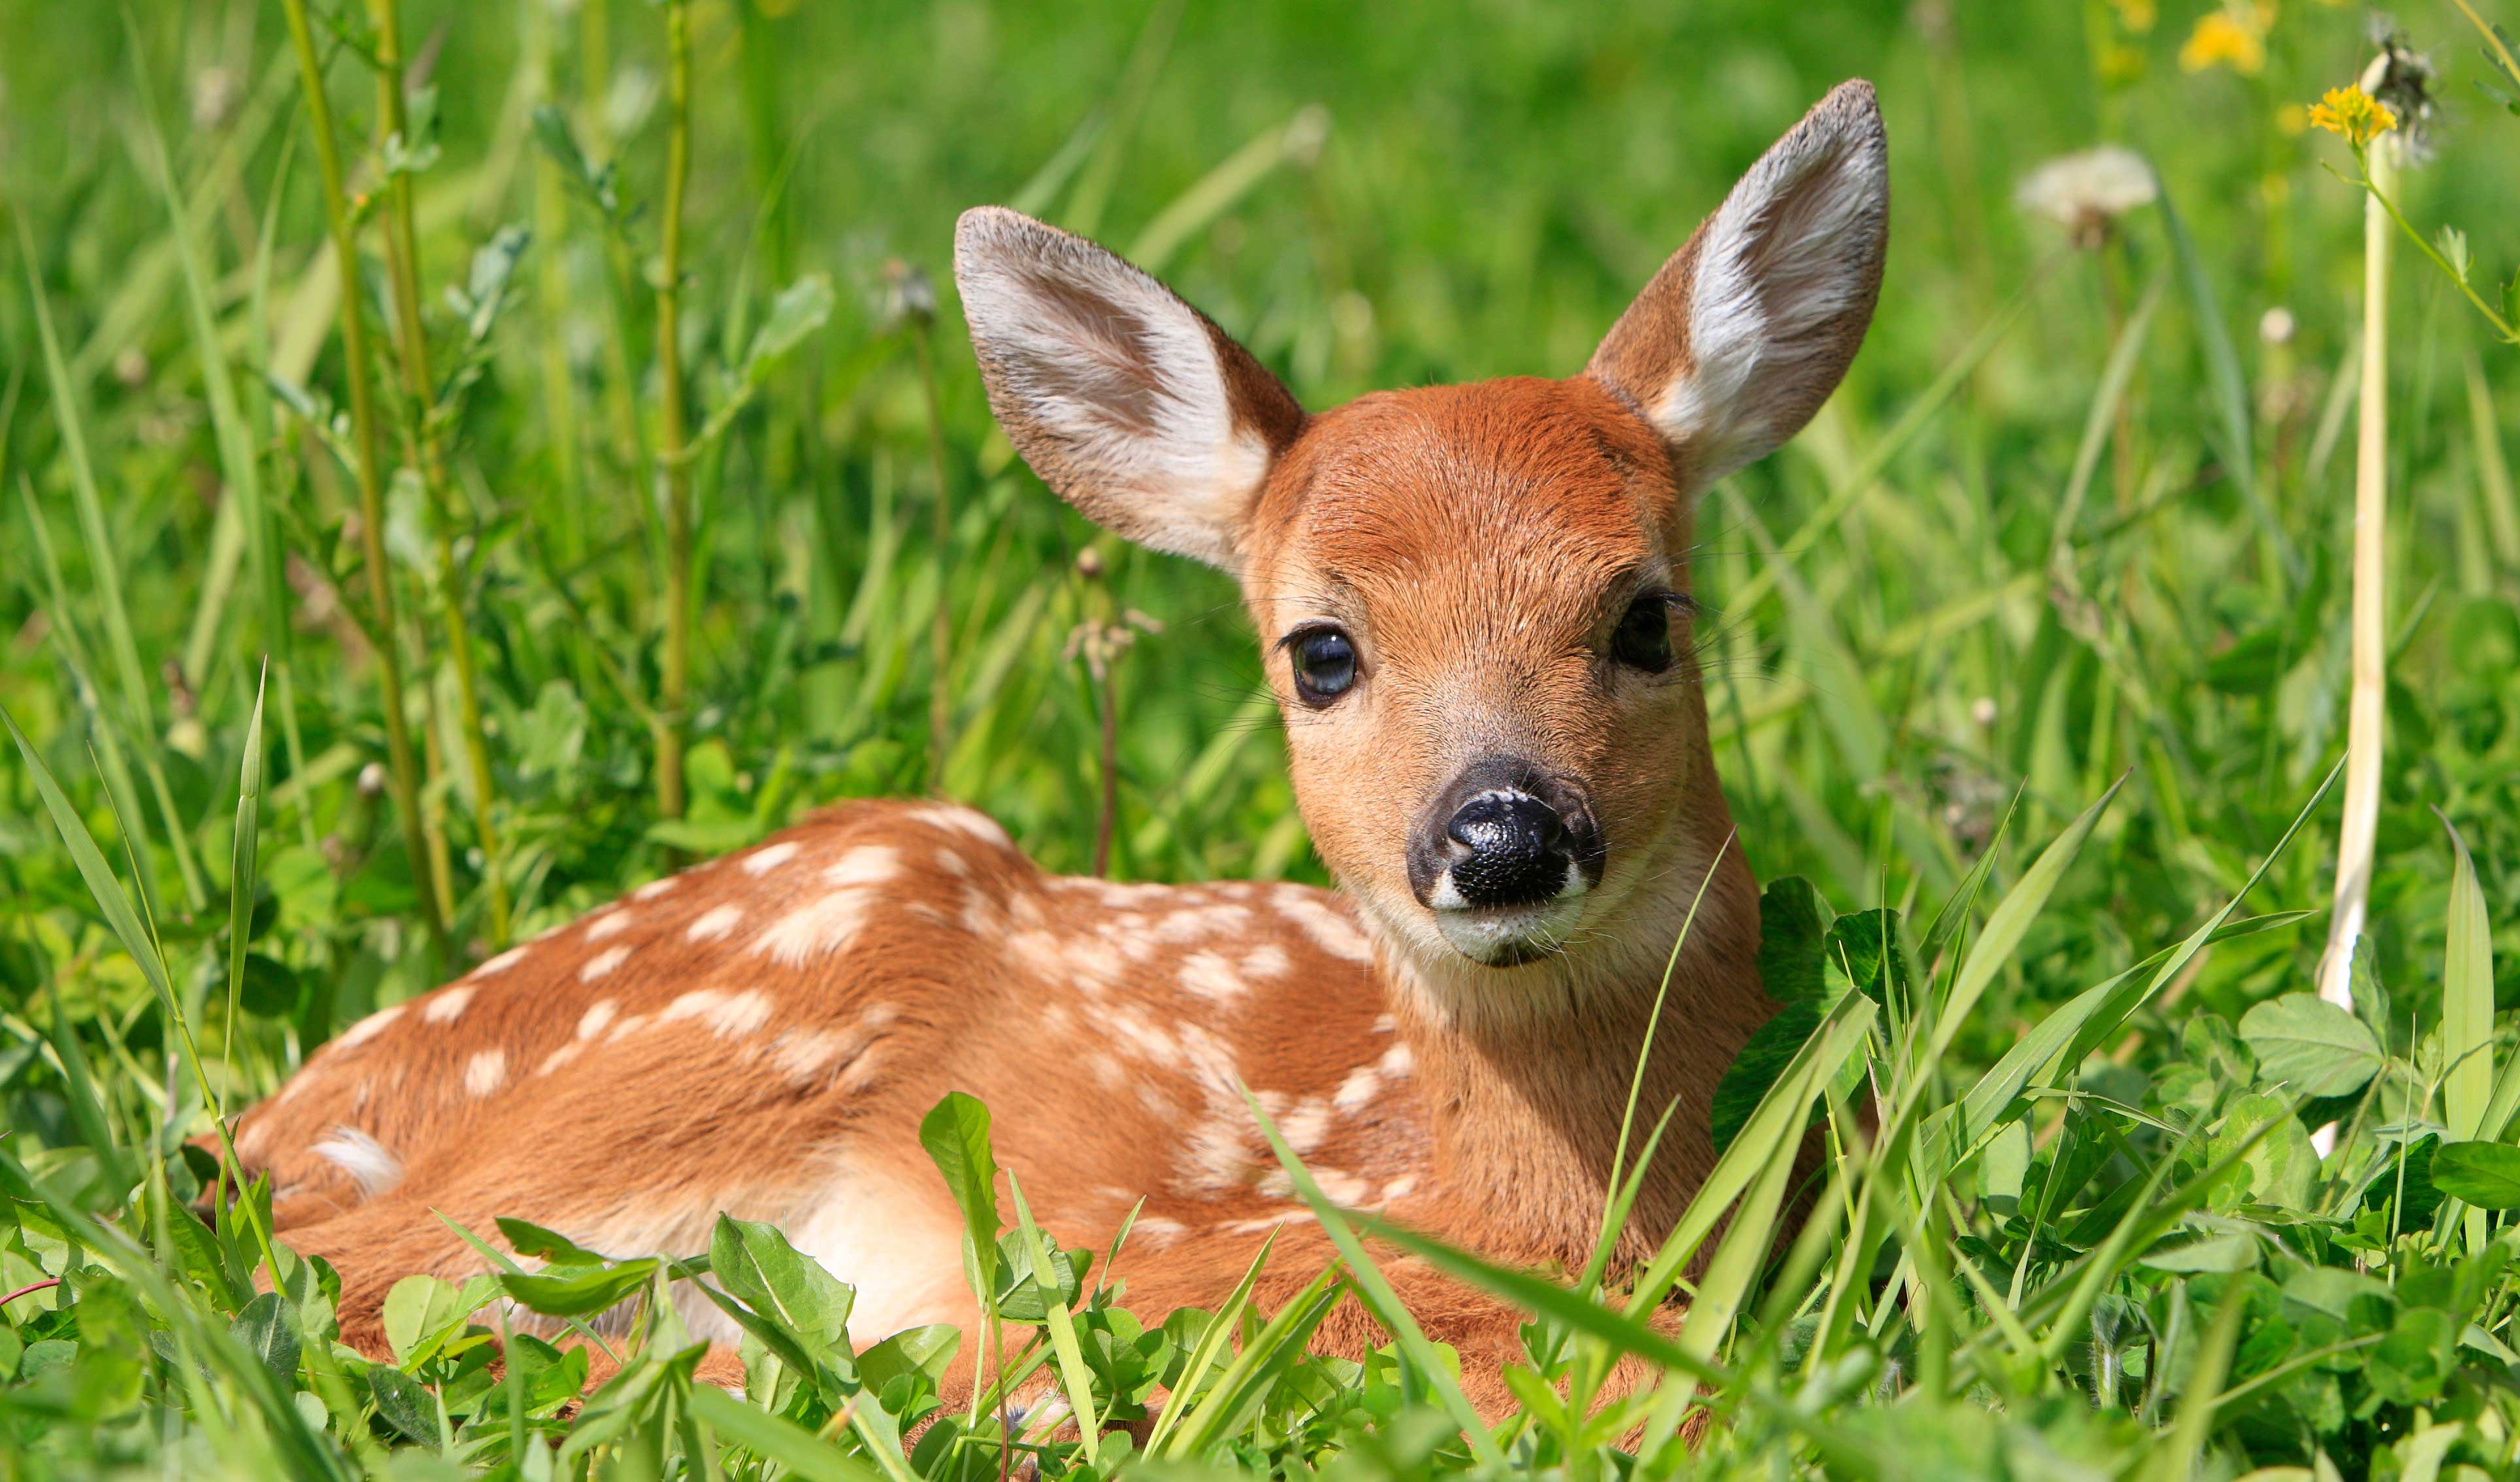 A fawn in the grass.